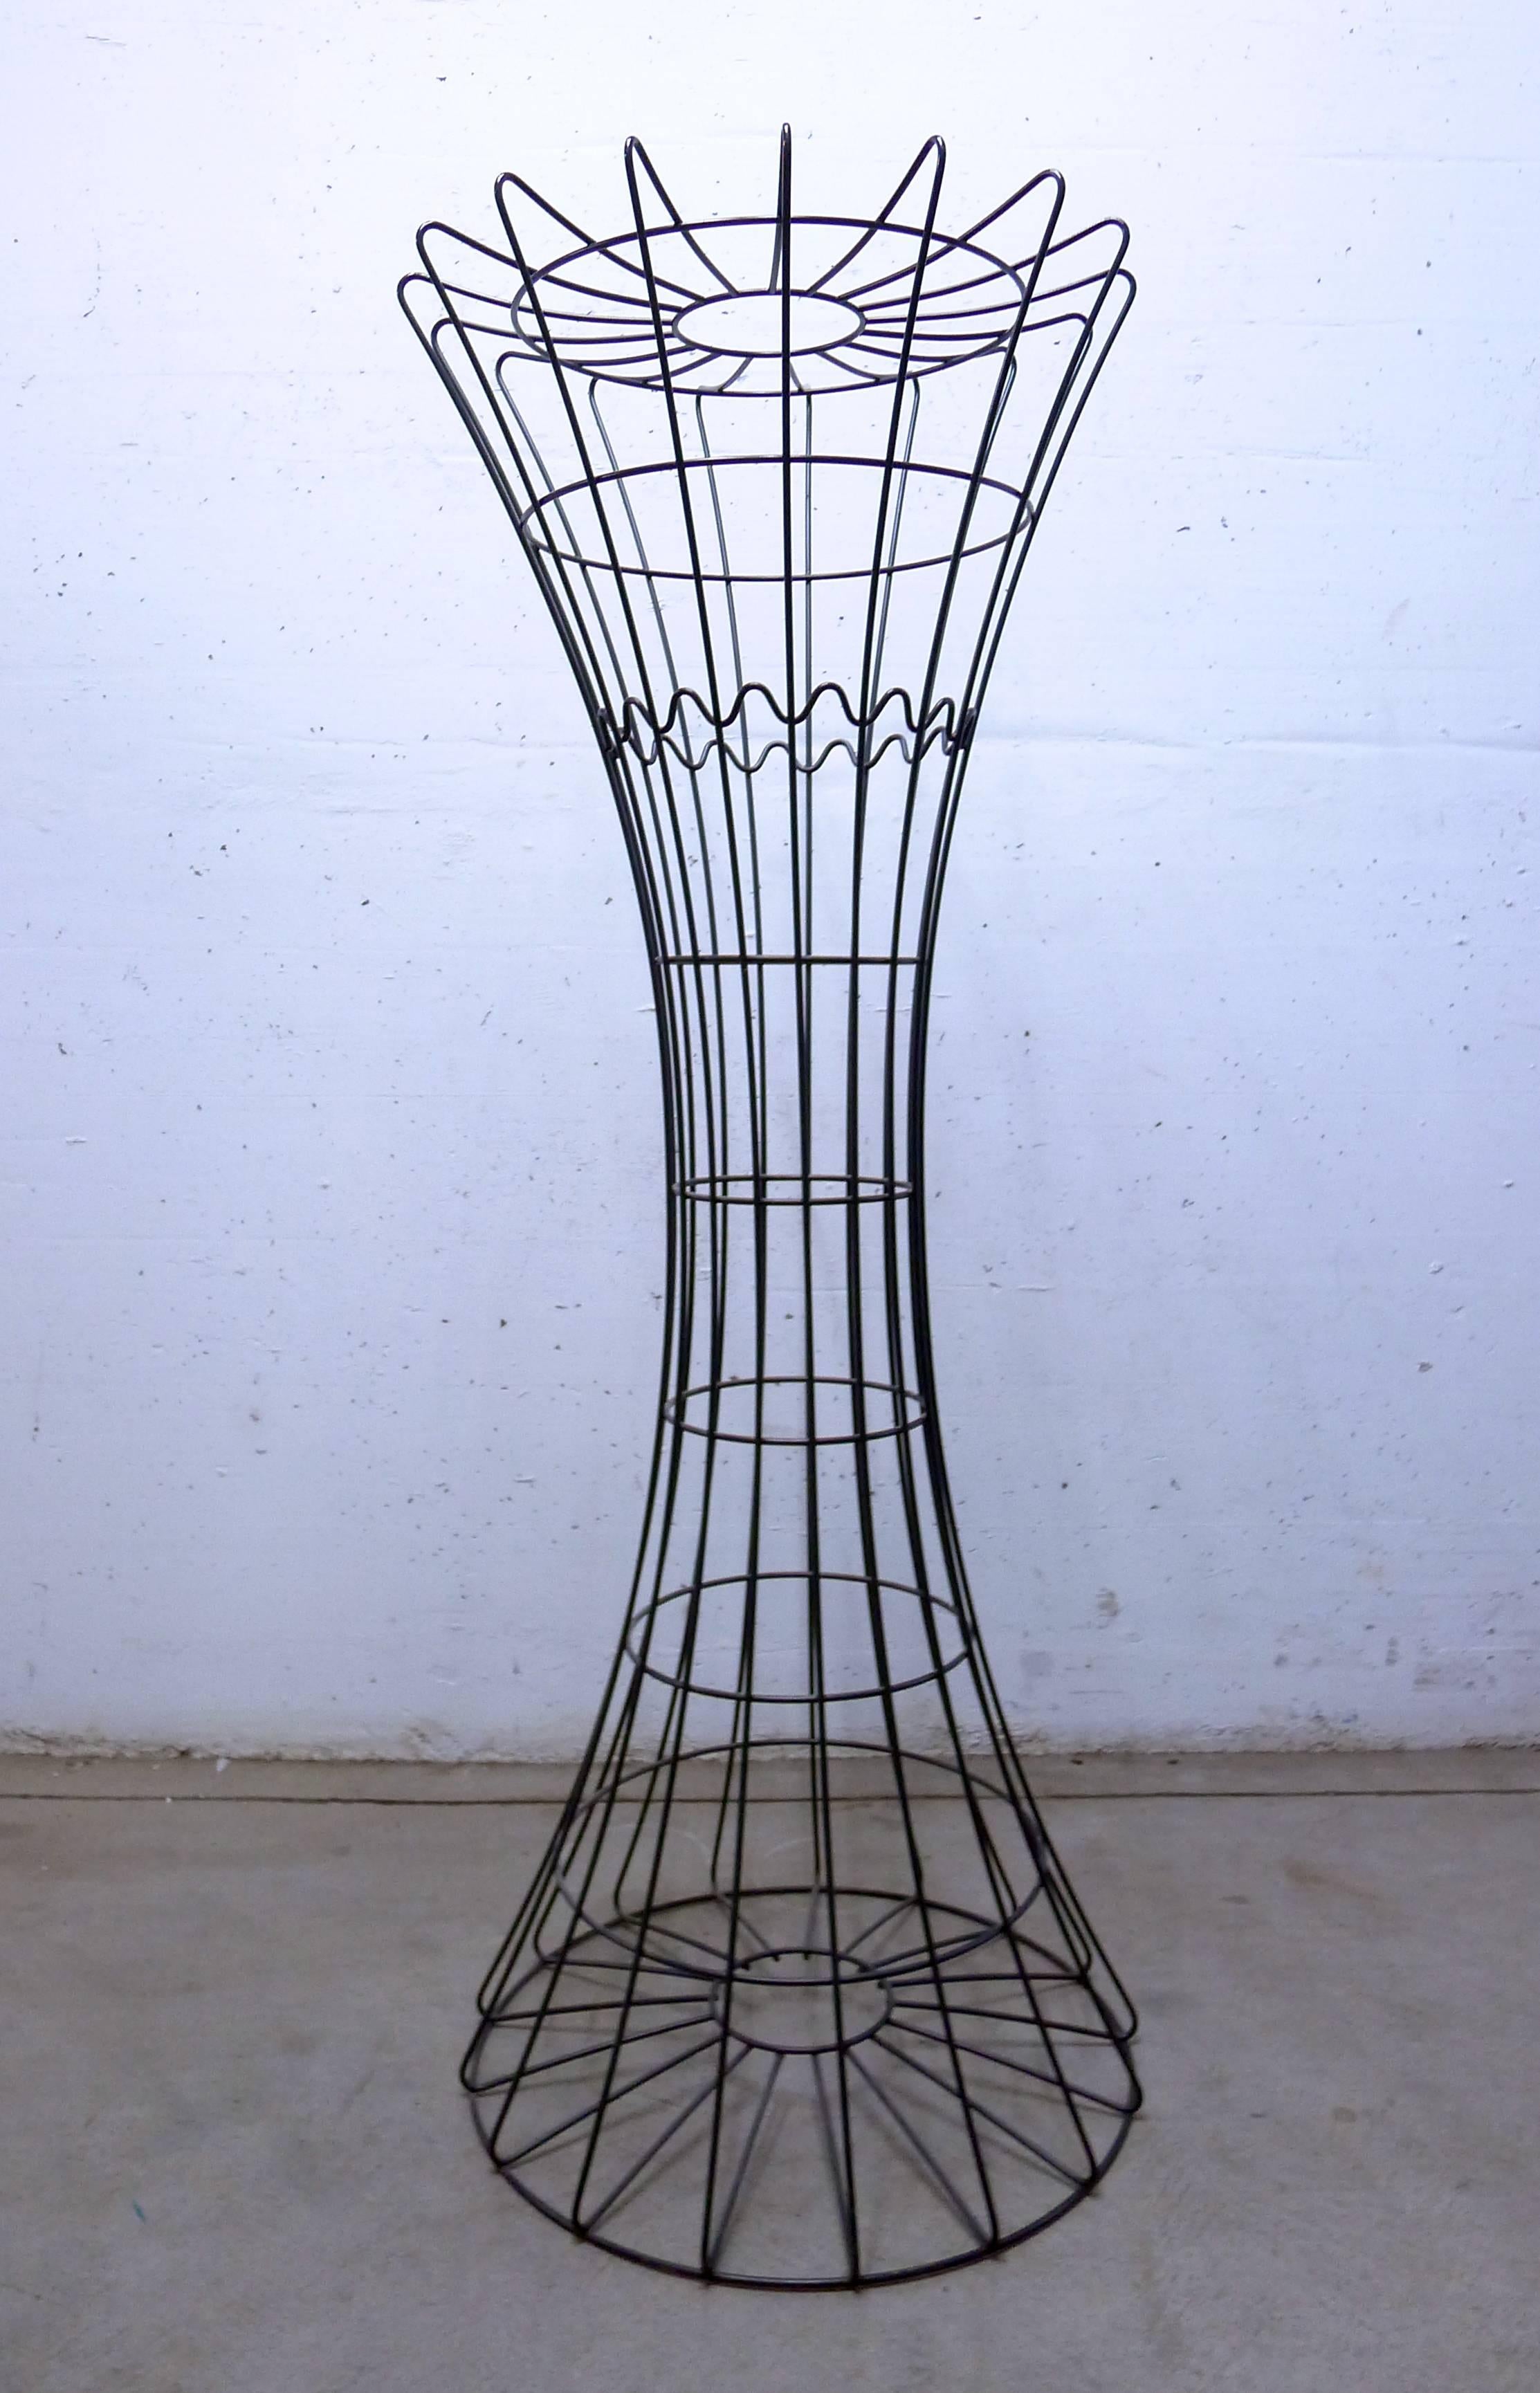 Rare early edition of the Verner Panton coat stand, produced by Lüber (Switzerland)
Metal wire with black coating finish
Very sculptural item
Note the integrated folded hooks.